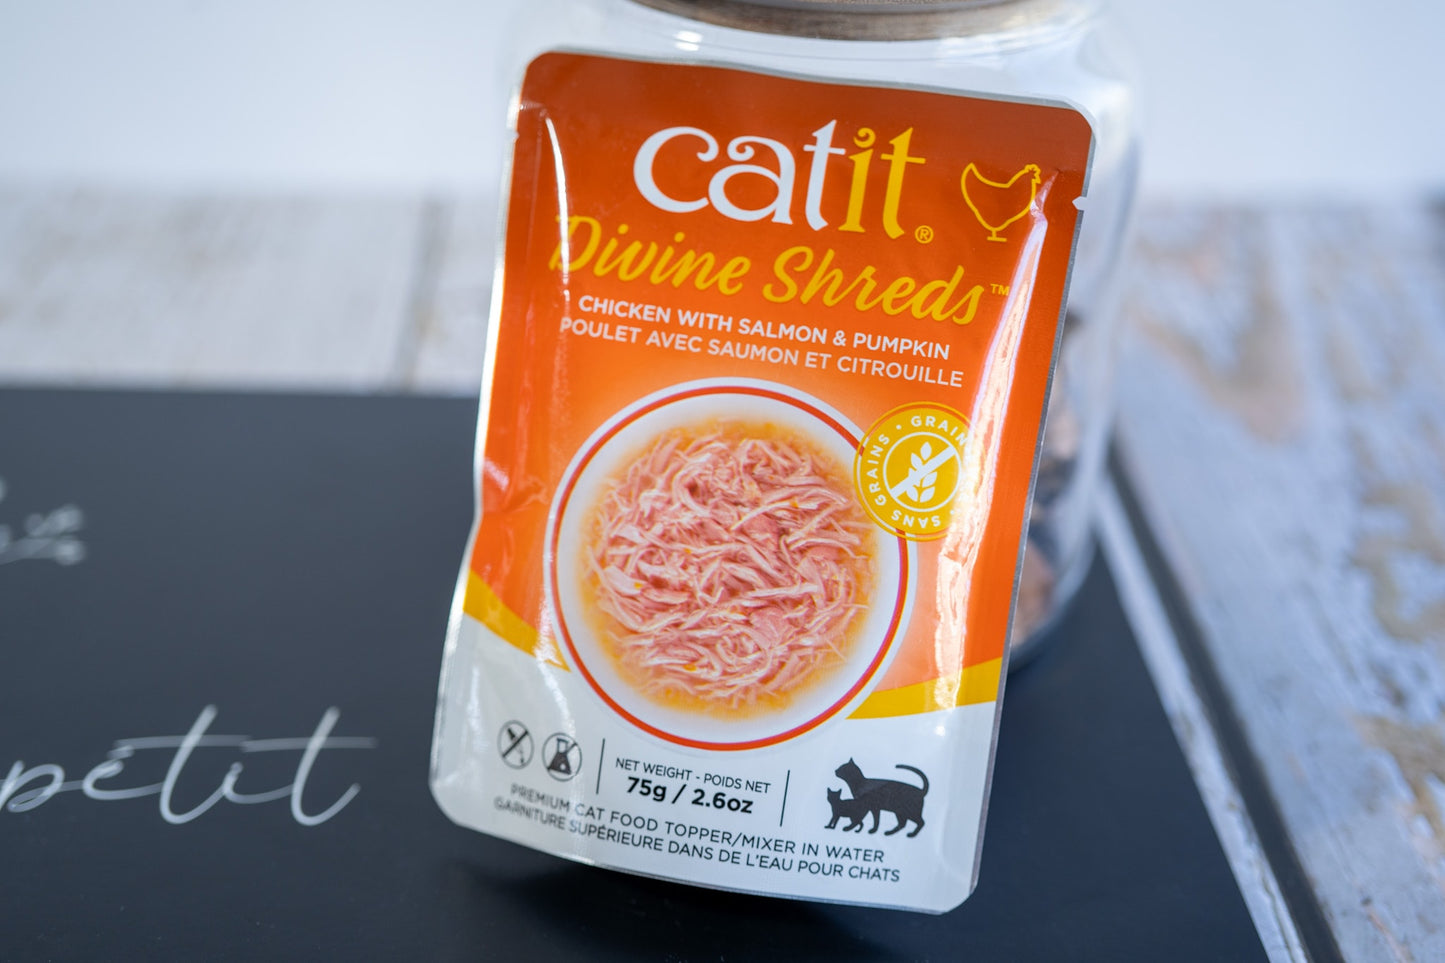 Premium cat food topping in water with chicken, salmon and pumpkin flavor.